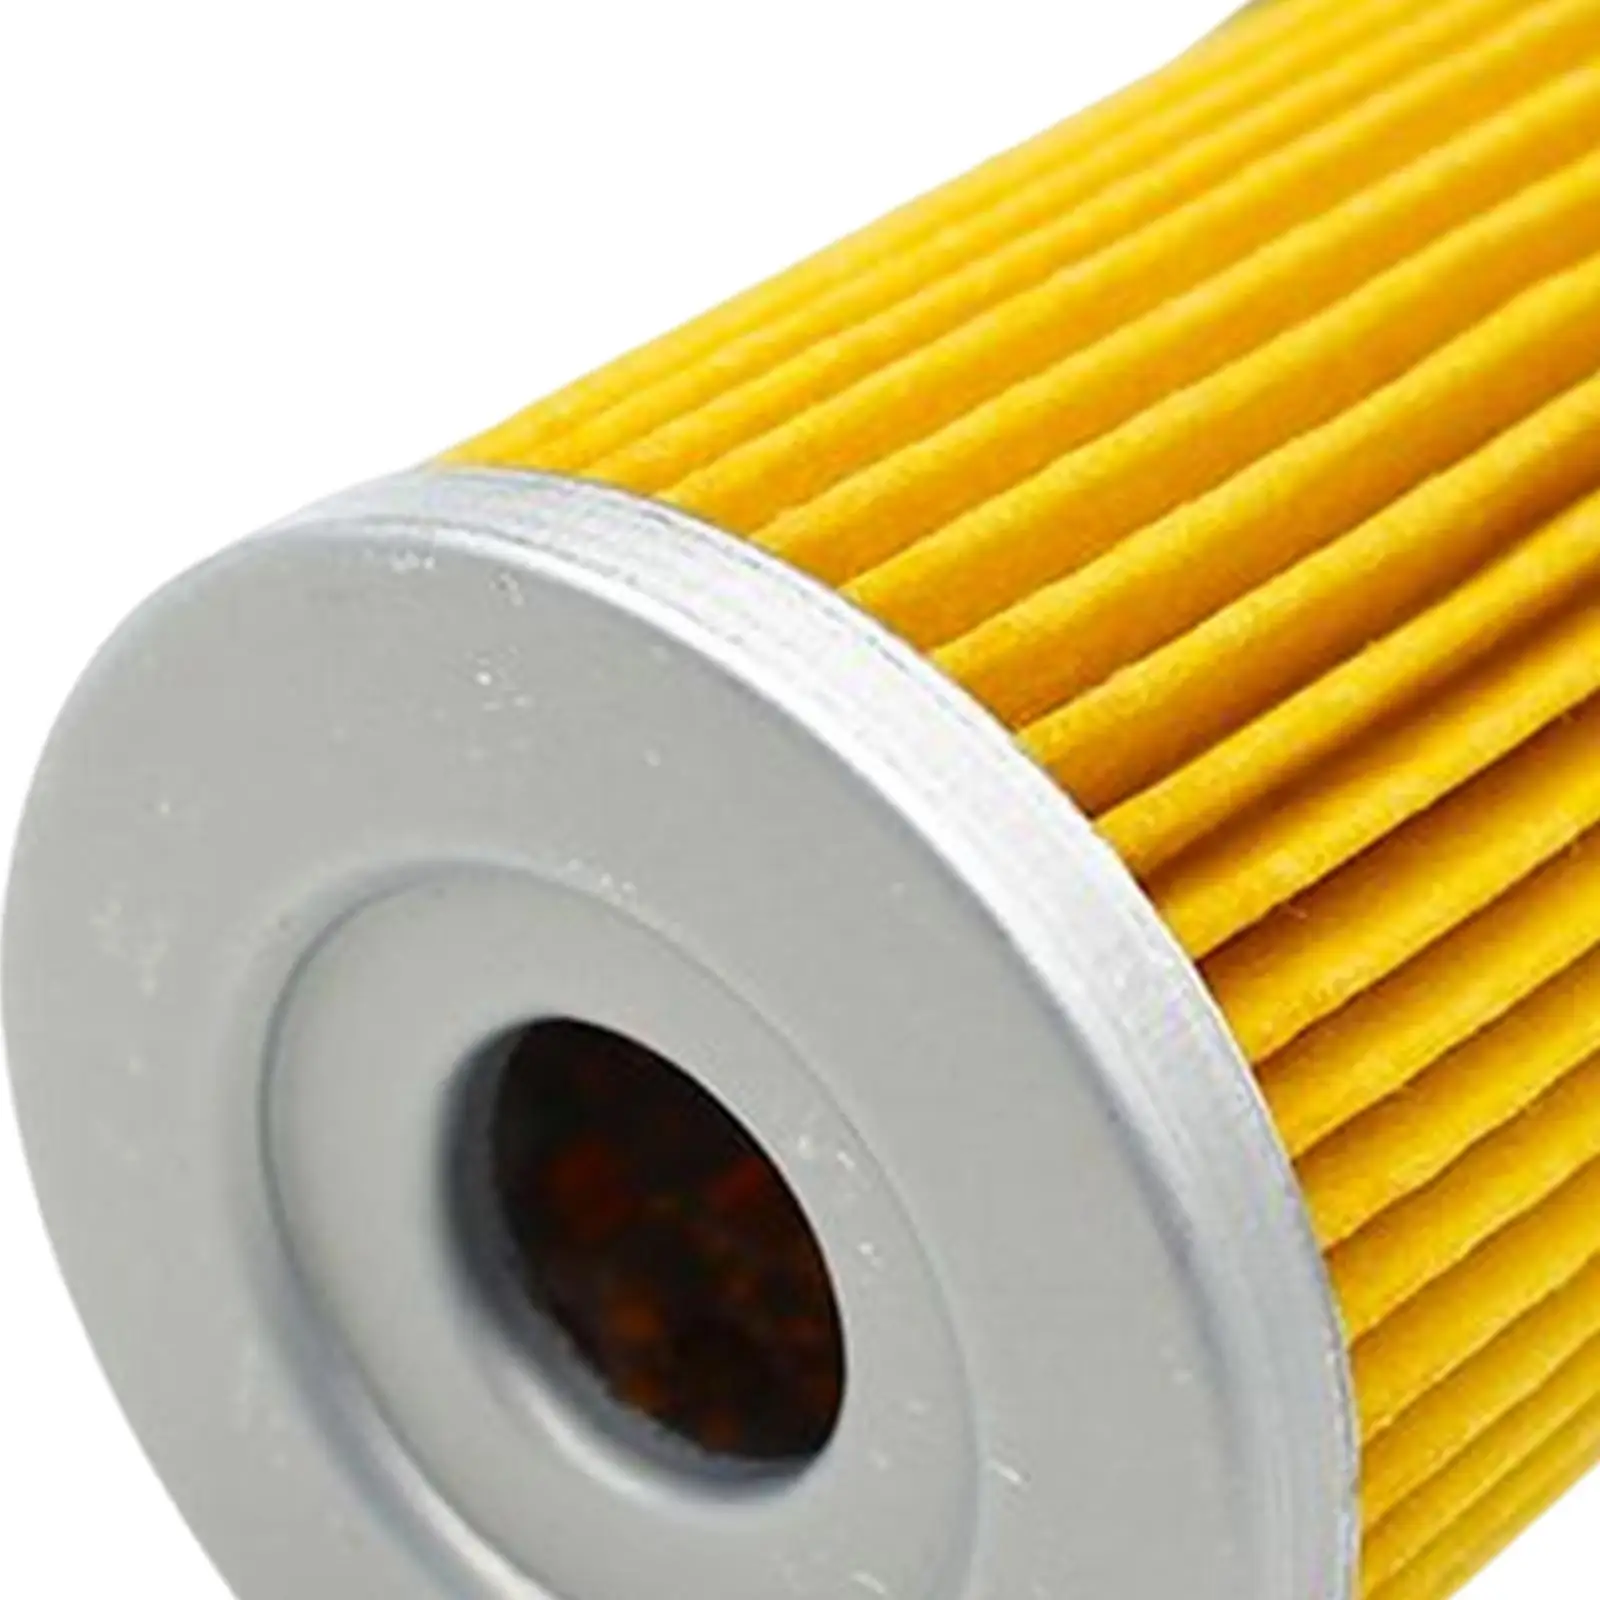 Motorcycle Oil Filter Replacement for 250 300 YP400 RV125 250 Premium High Performance